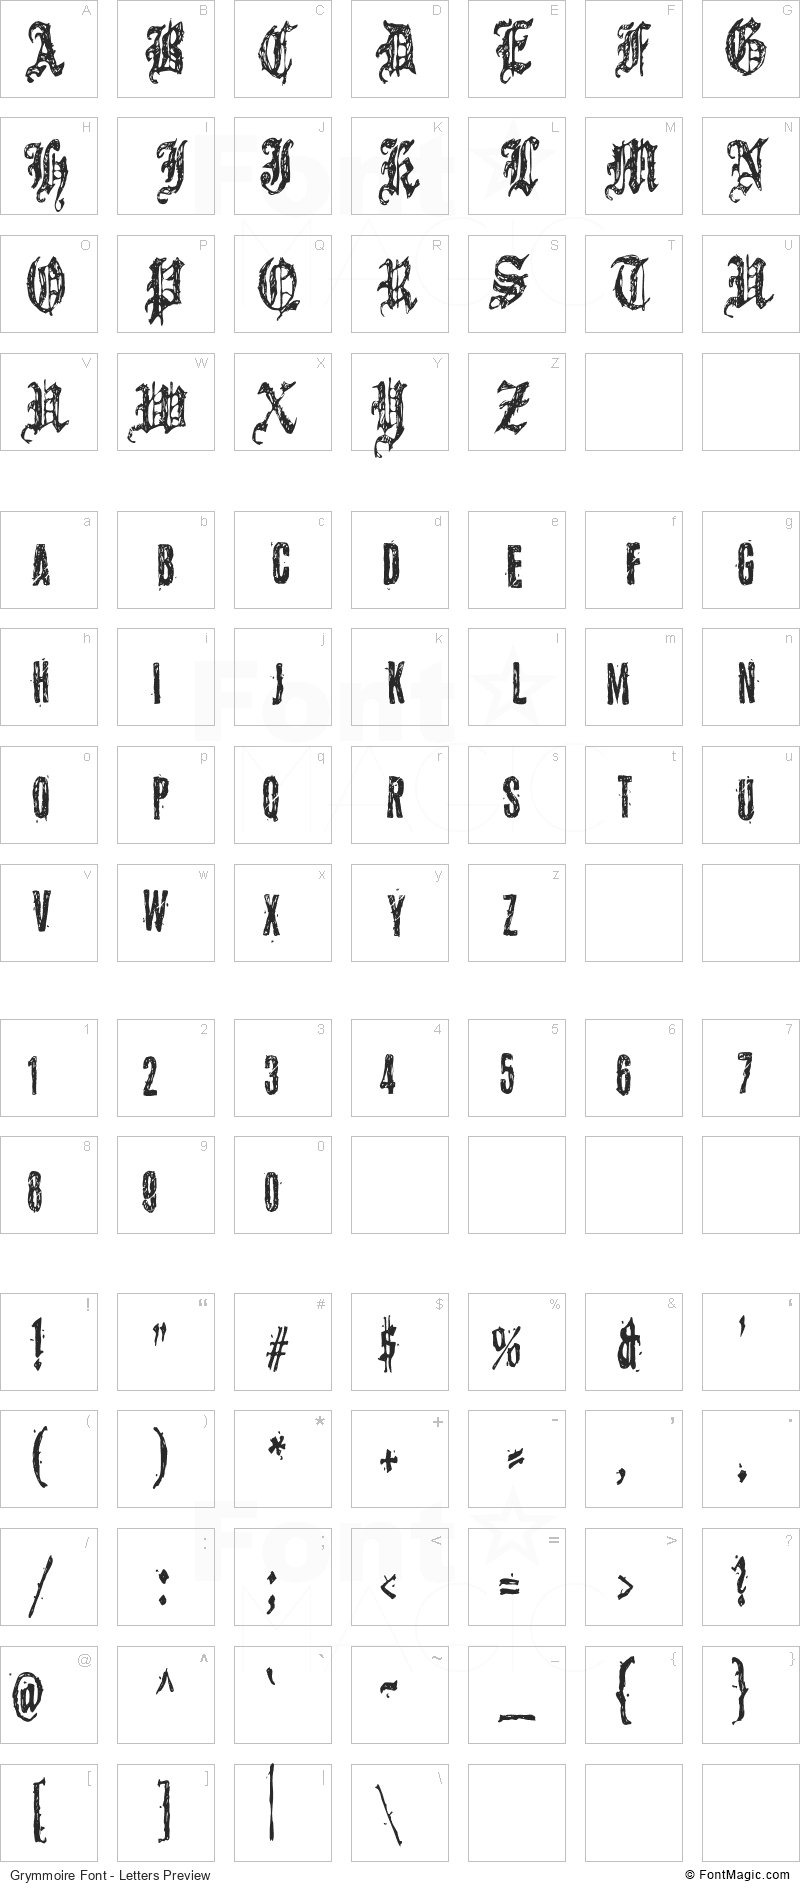 Grymmoire Font - All Latters Preview Chart